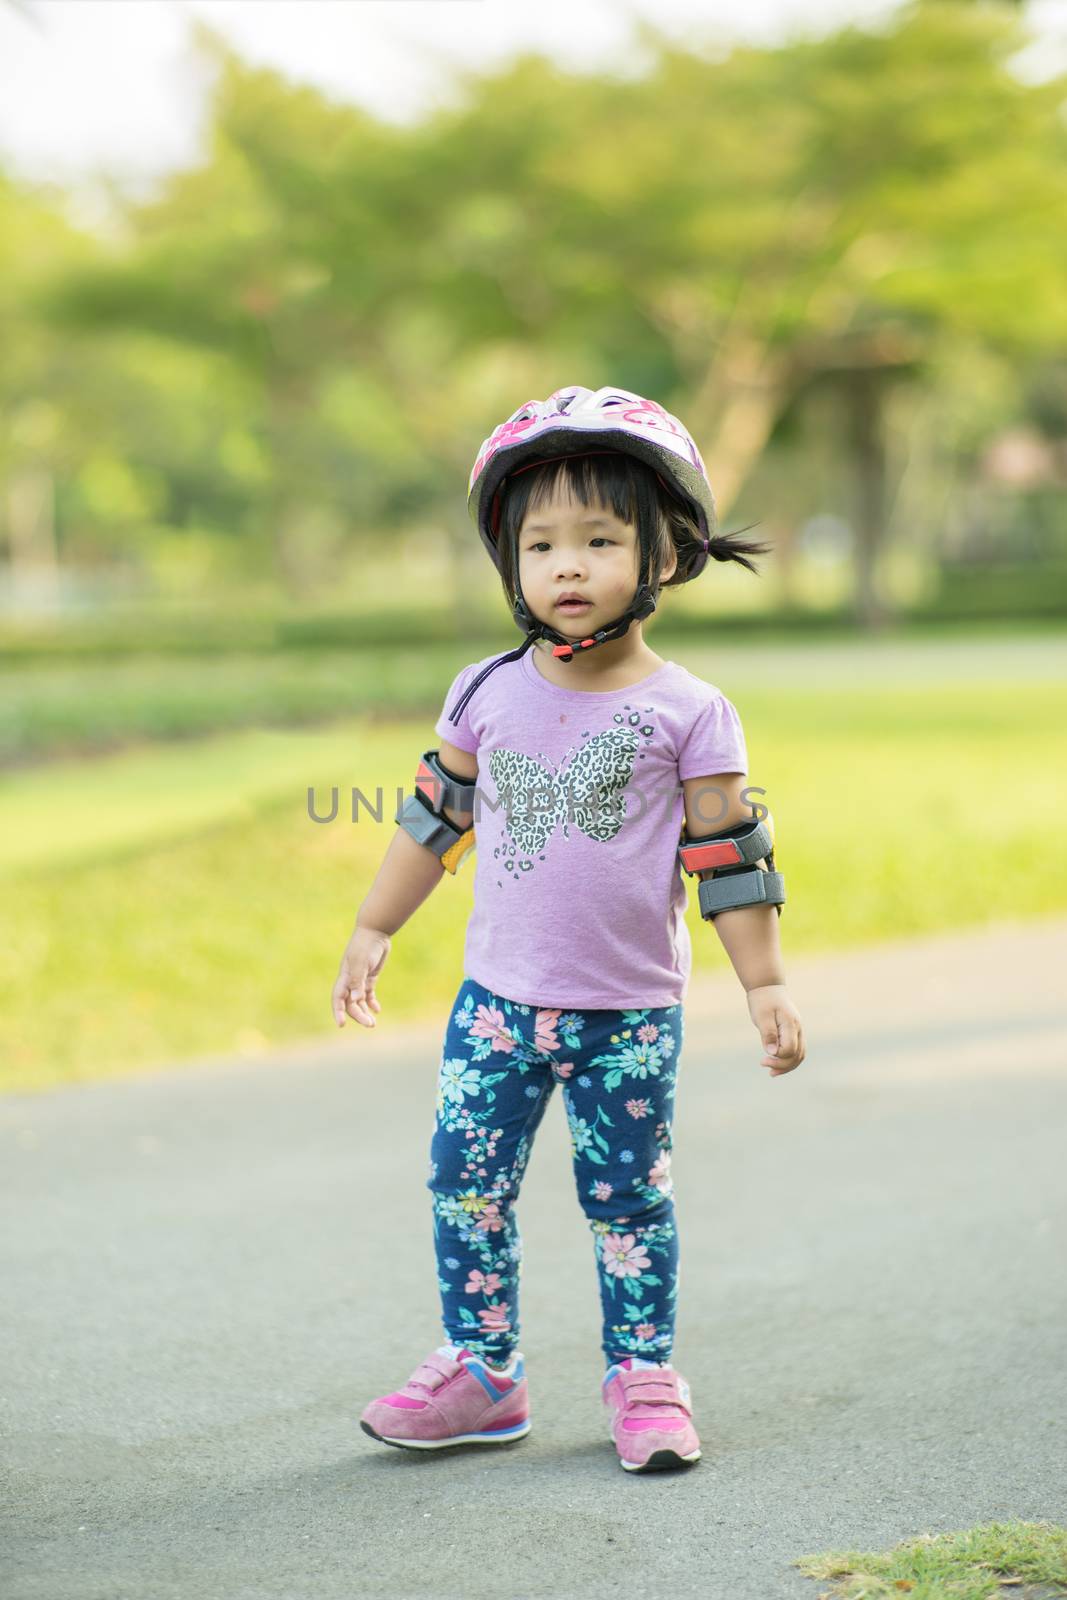 Little girl in cycling wear ready to learn riding balance bike in the park